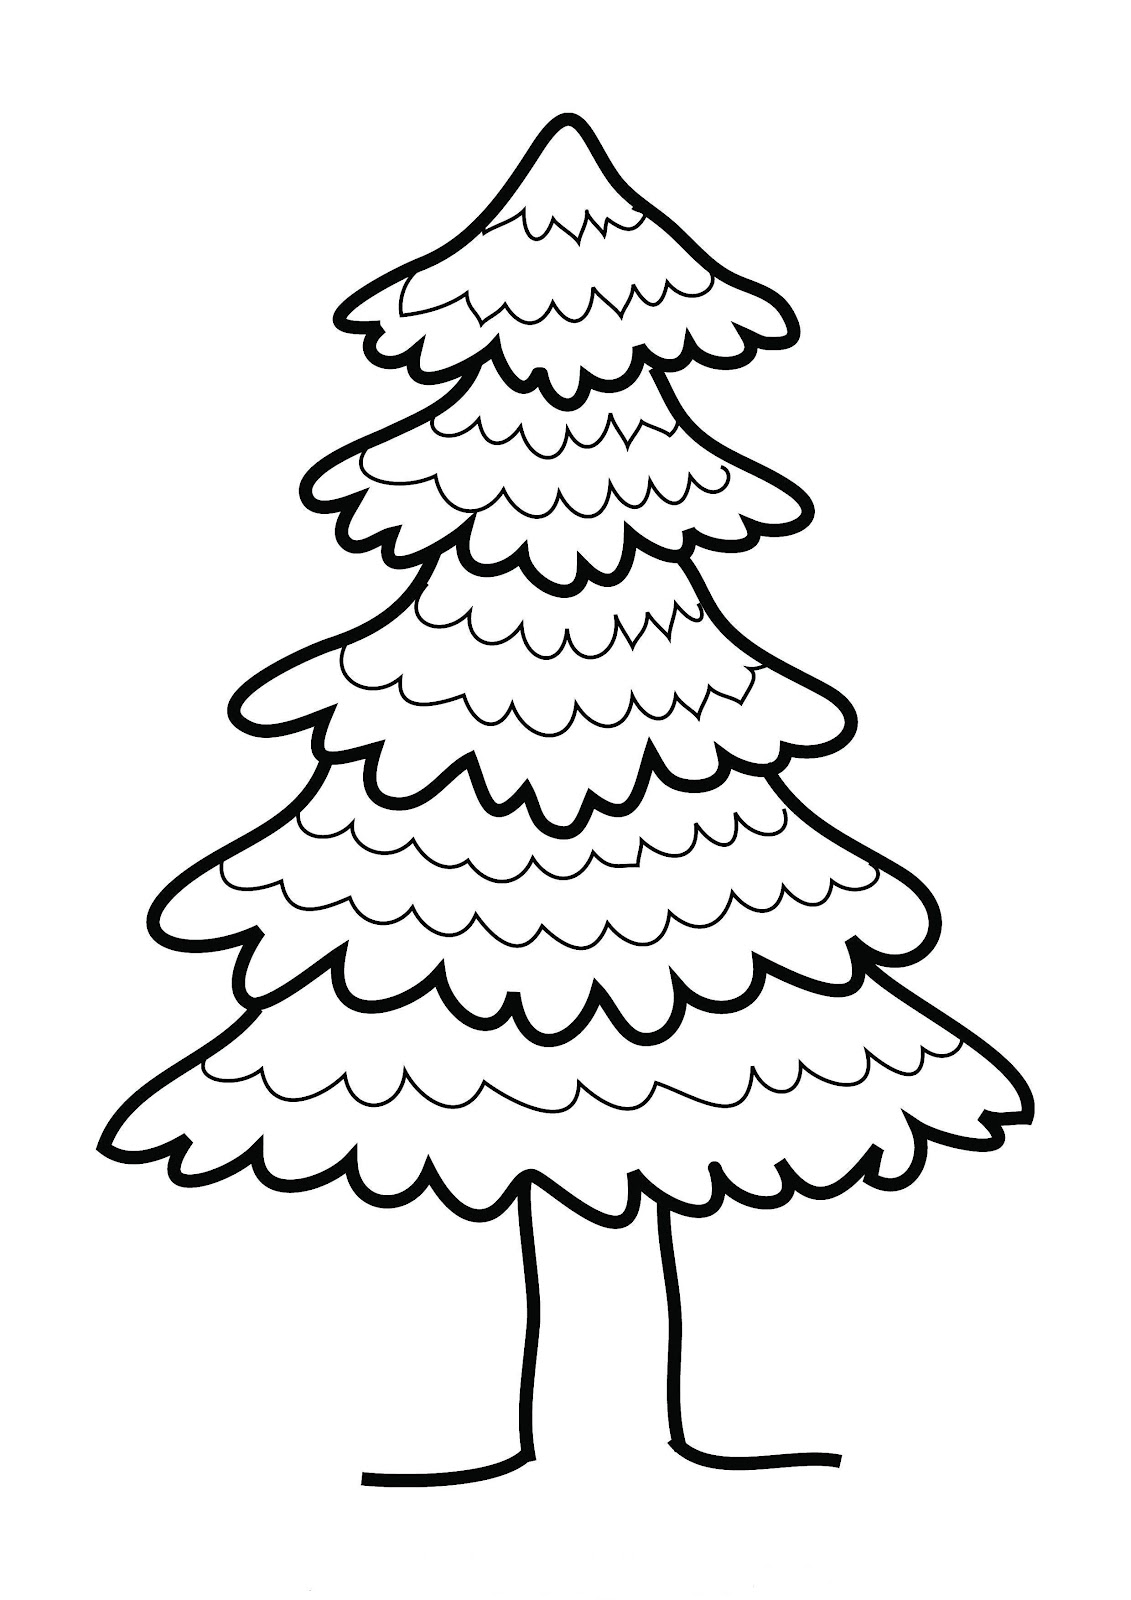 Pine Tree Clip Art Black And White - ClipArt Best